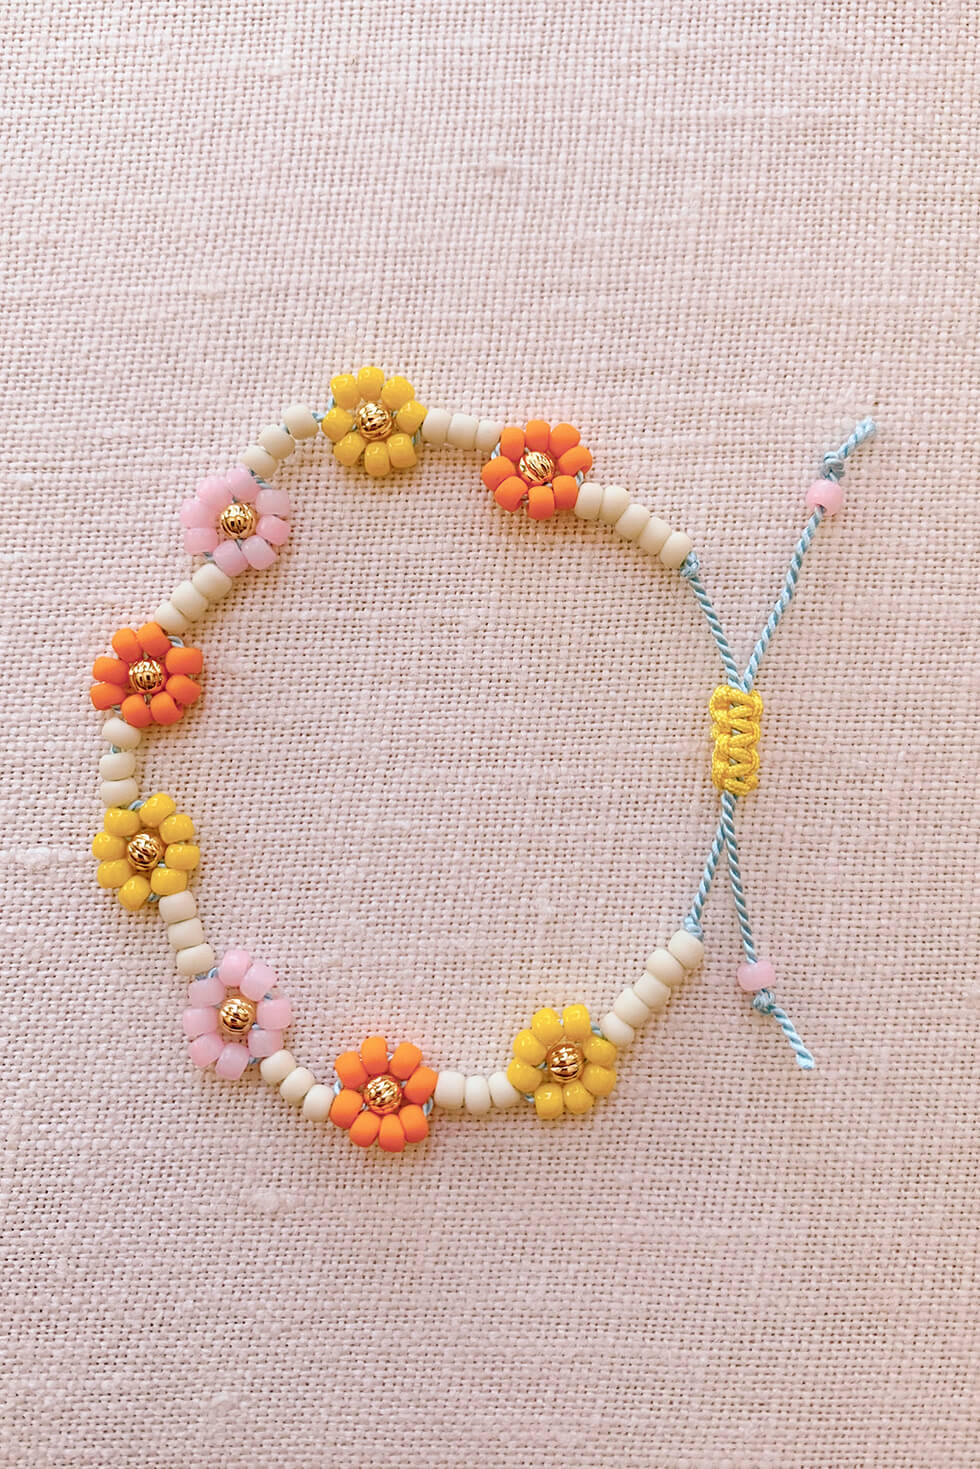 DIY Bead Craft Ideas To Try At Home - Kids Art & Craft